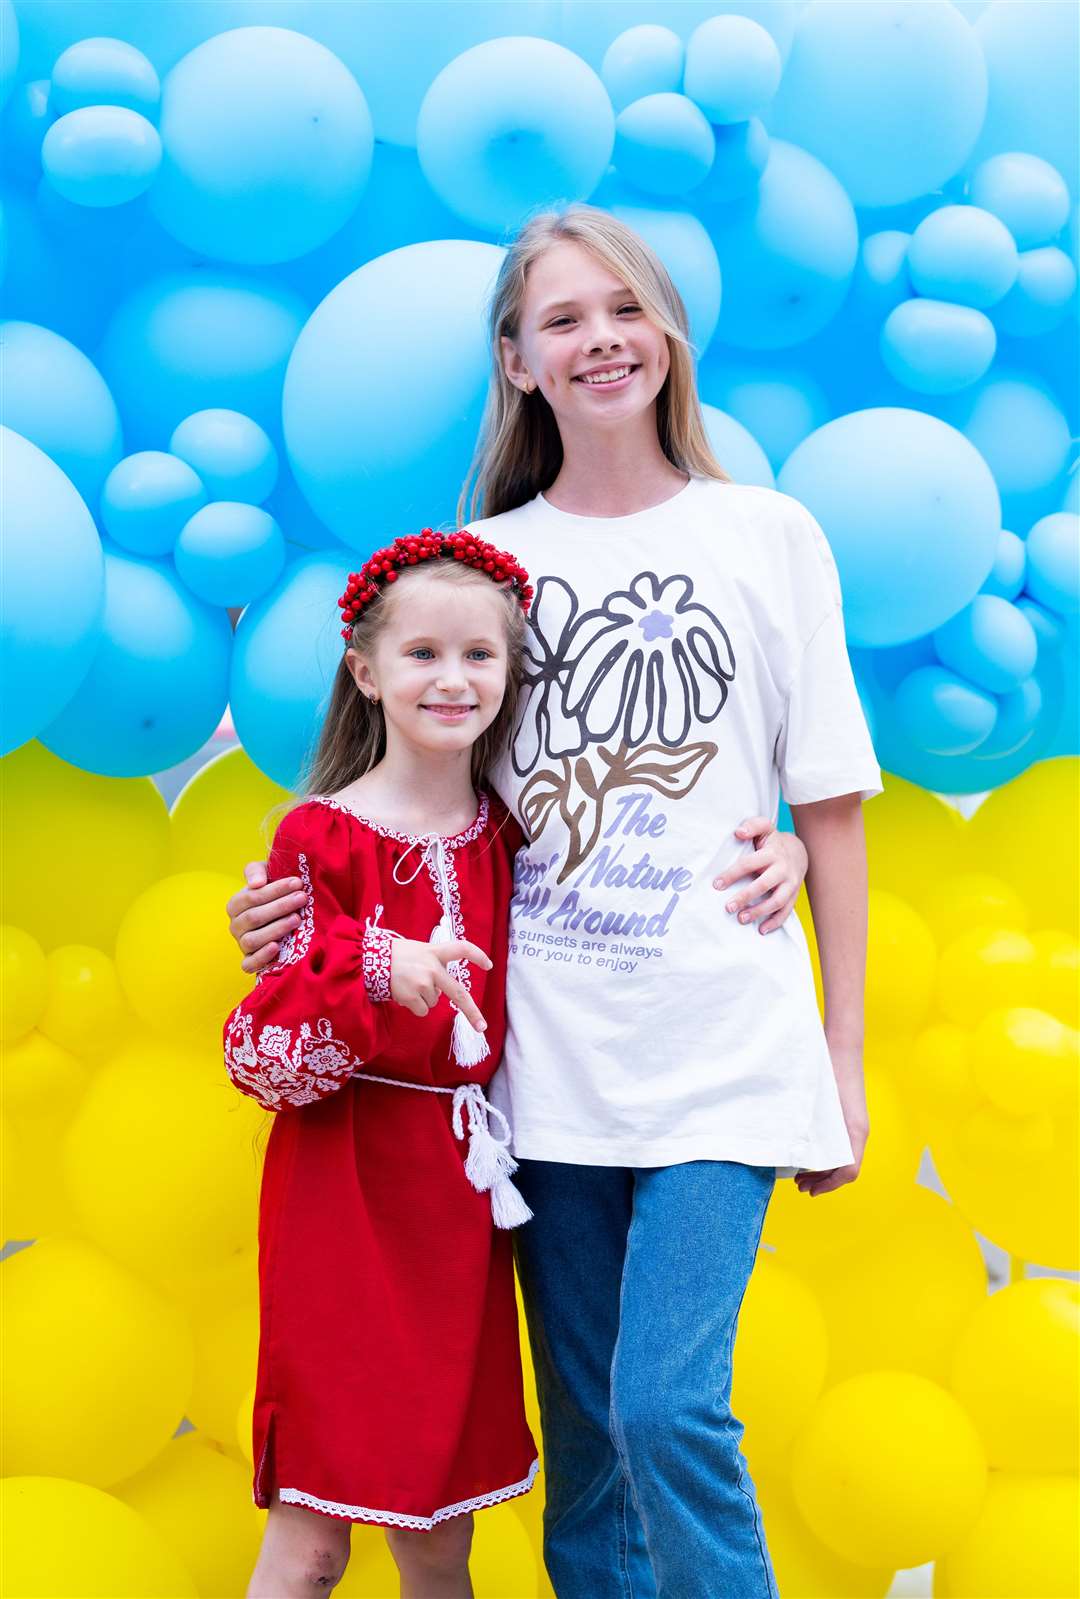 Many came for a picture outside of a balloon background in Ukraine colours. Picture: Ian Burt